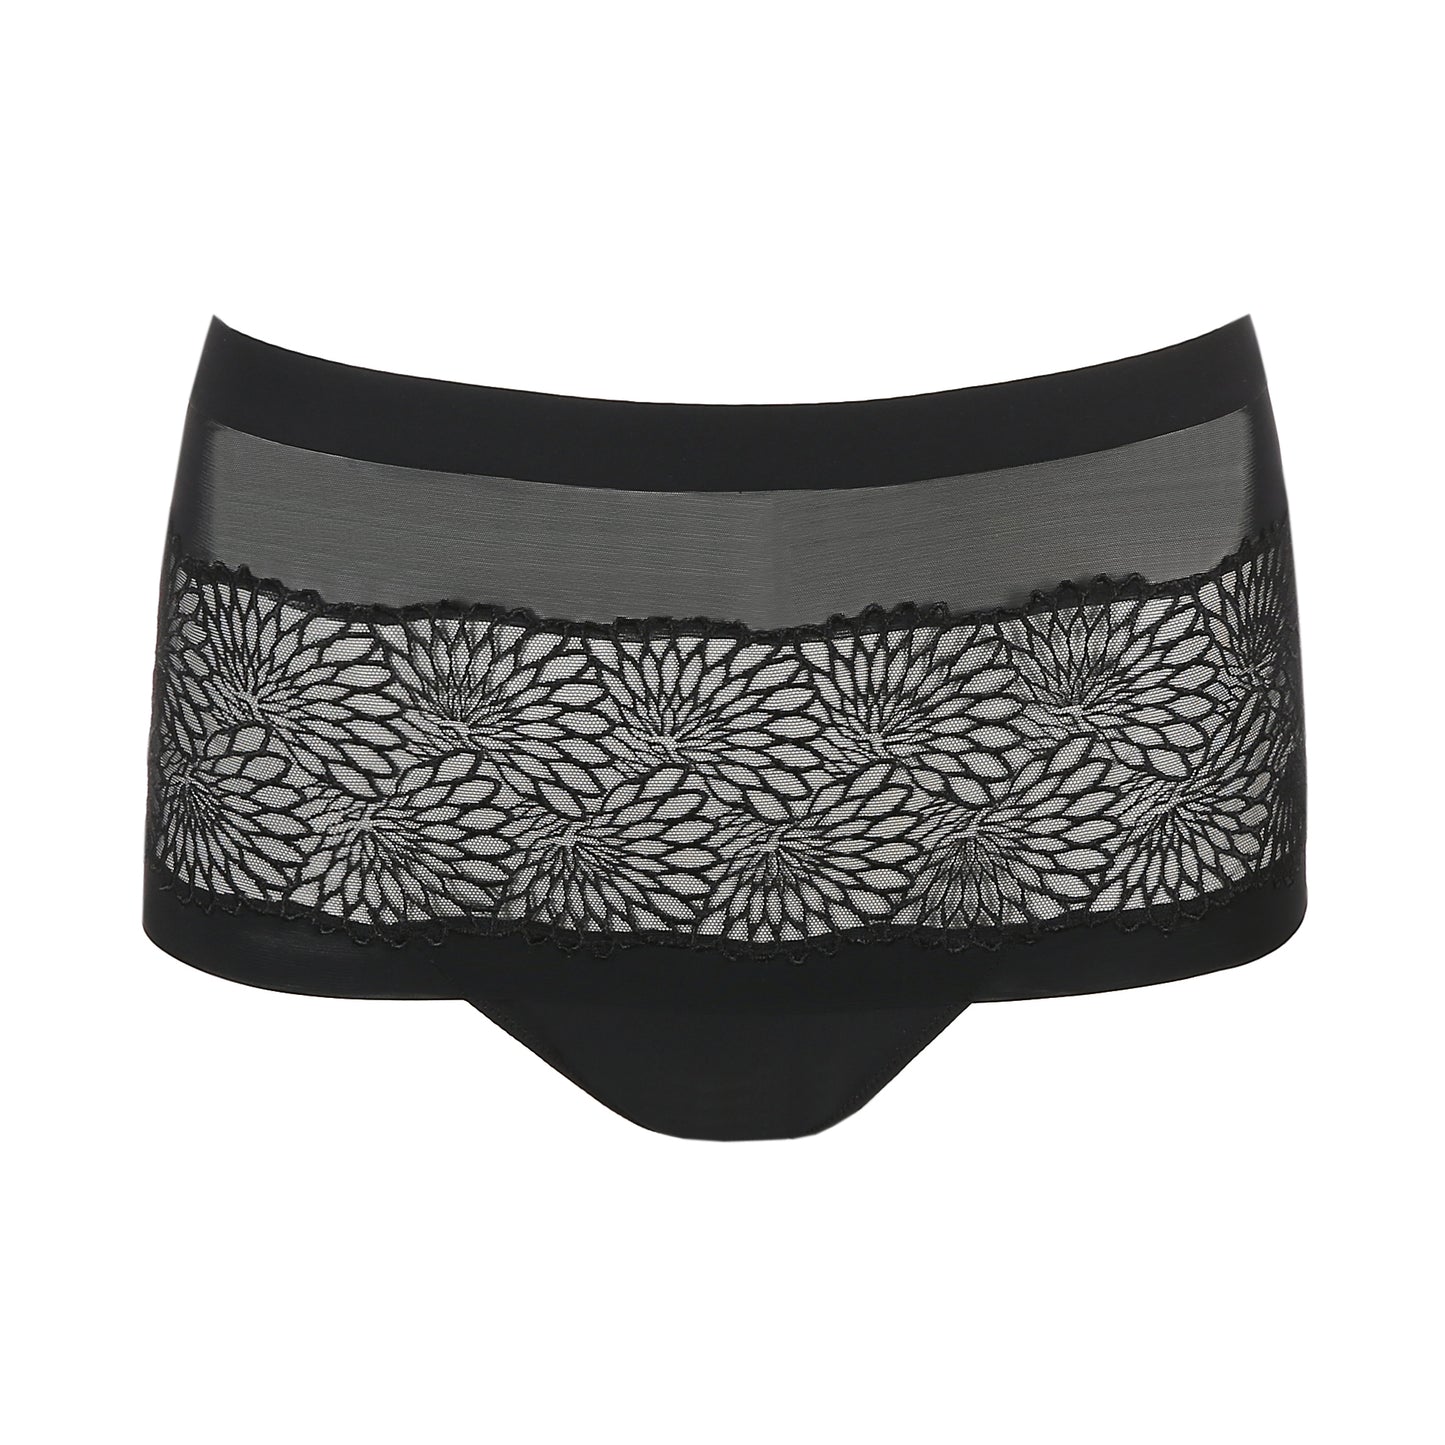 Sophora high-waisted cheeky panty in Black by PrimaDonna.